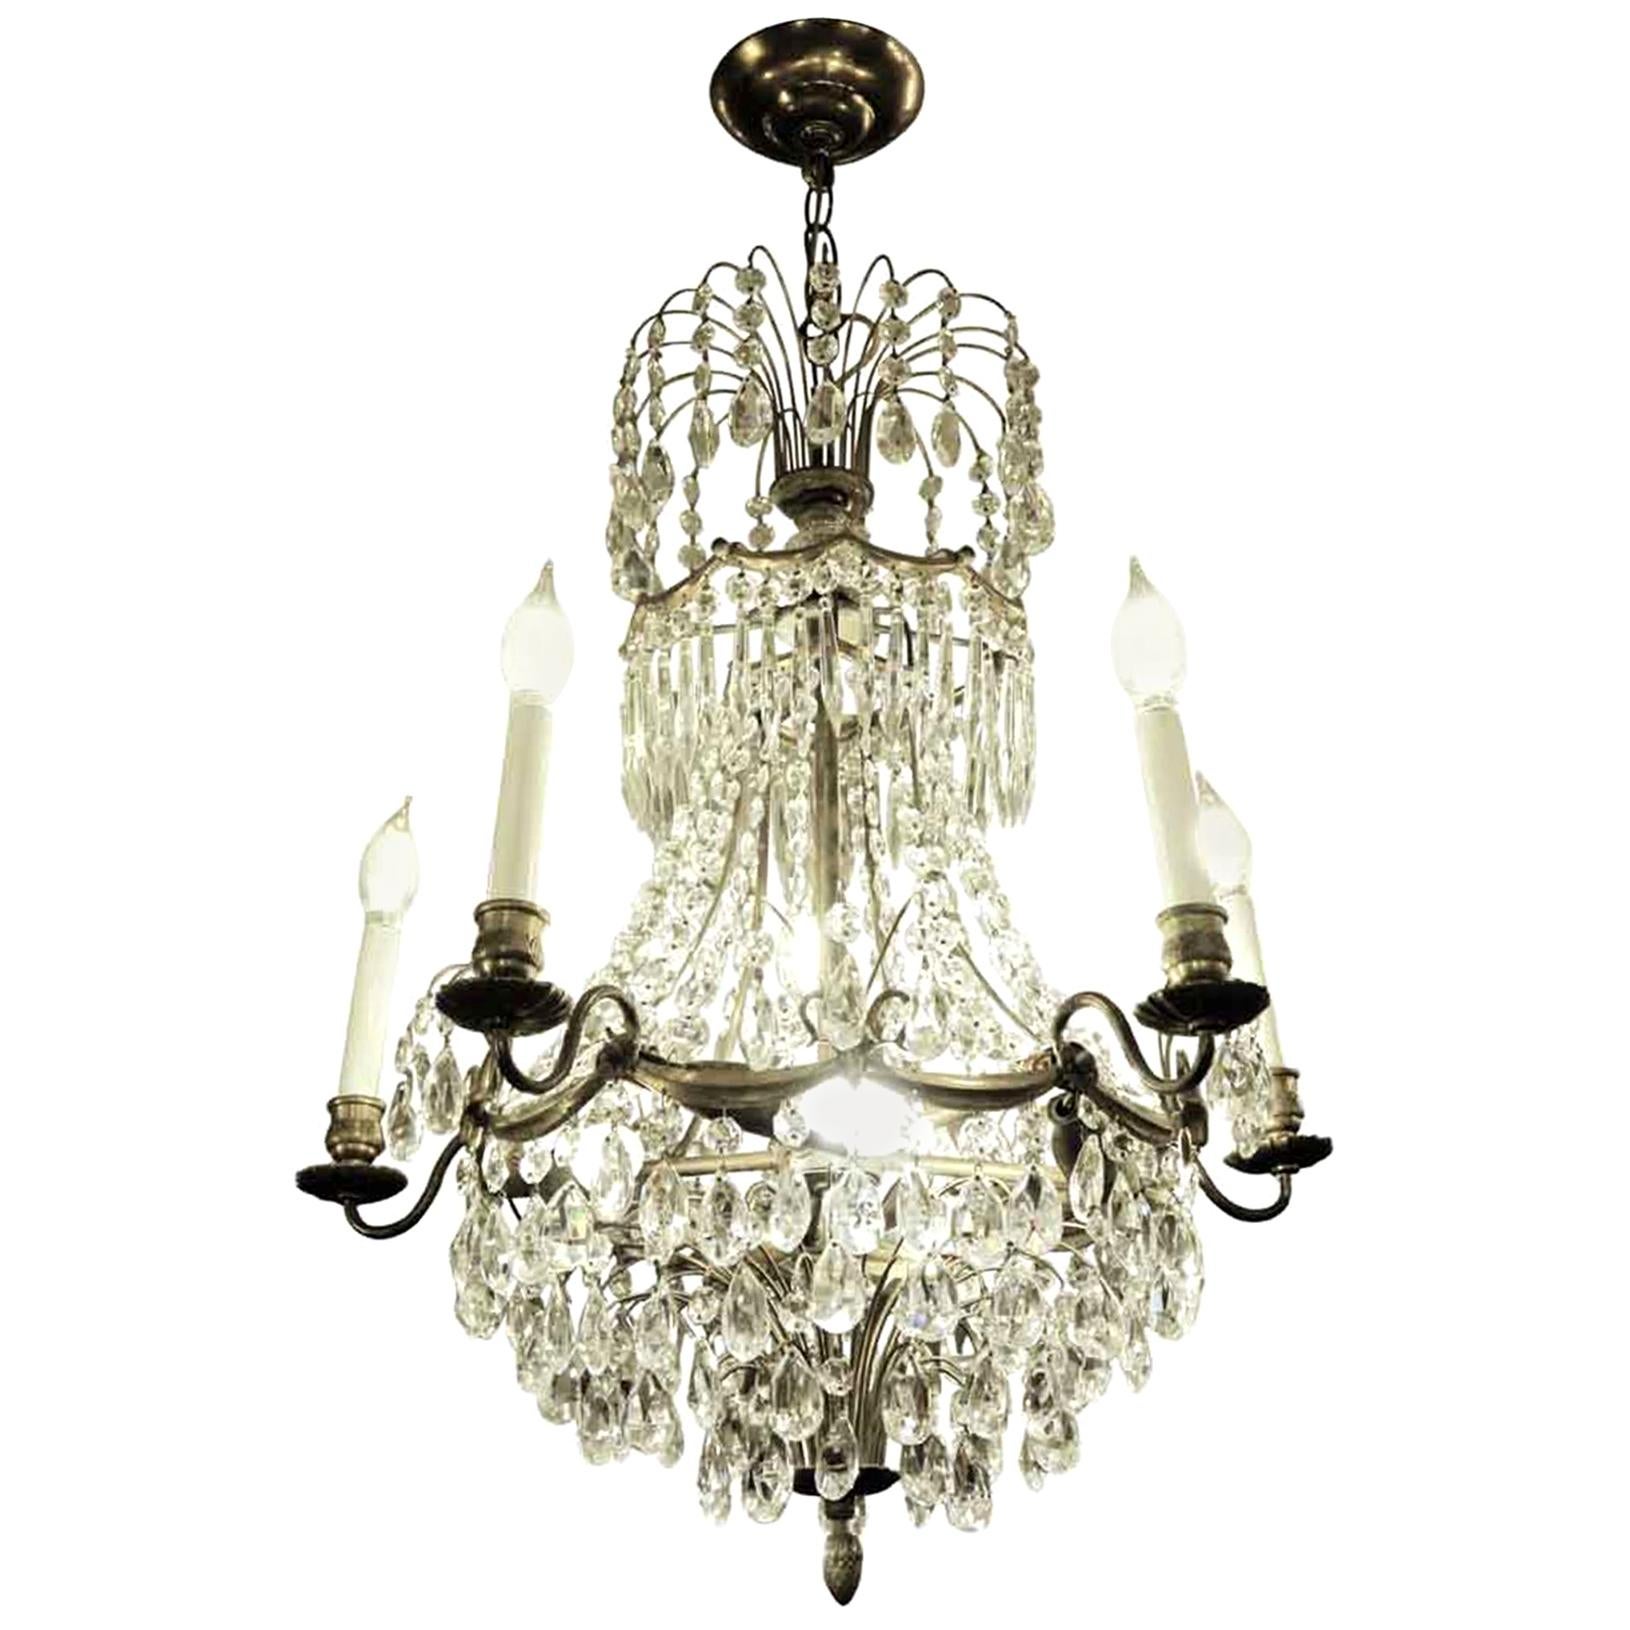 1920s Empire Style 10-Light Crystal and Brass Basket Chandelier